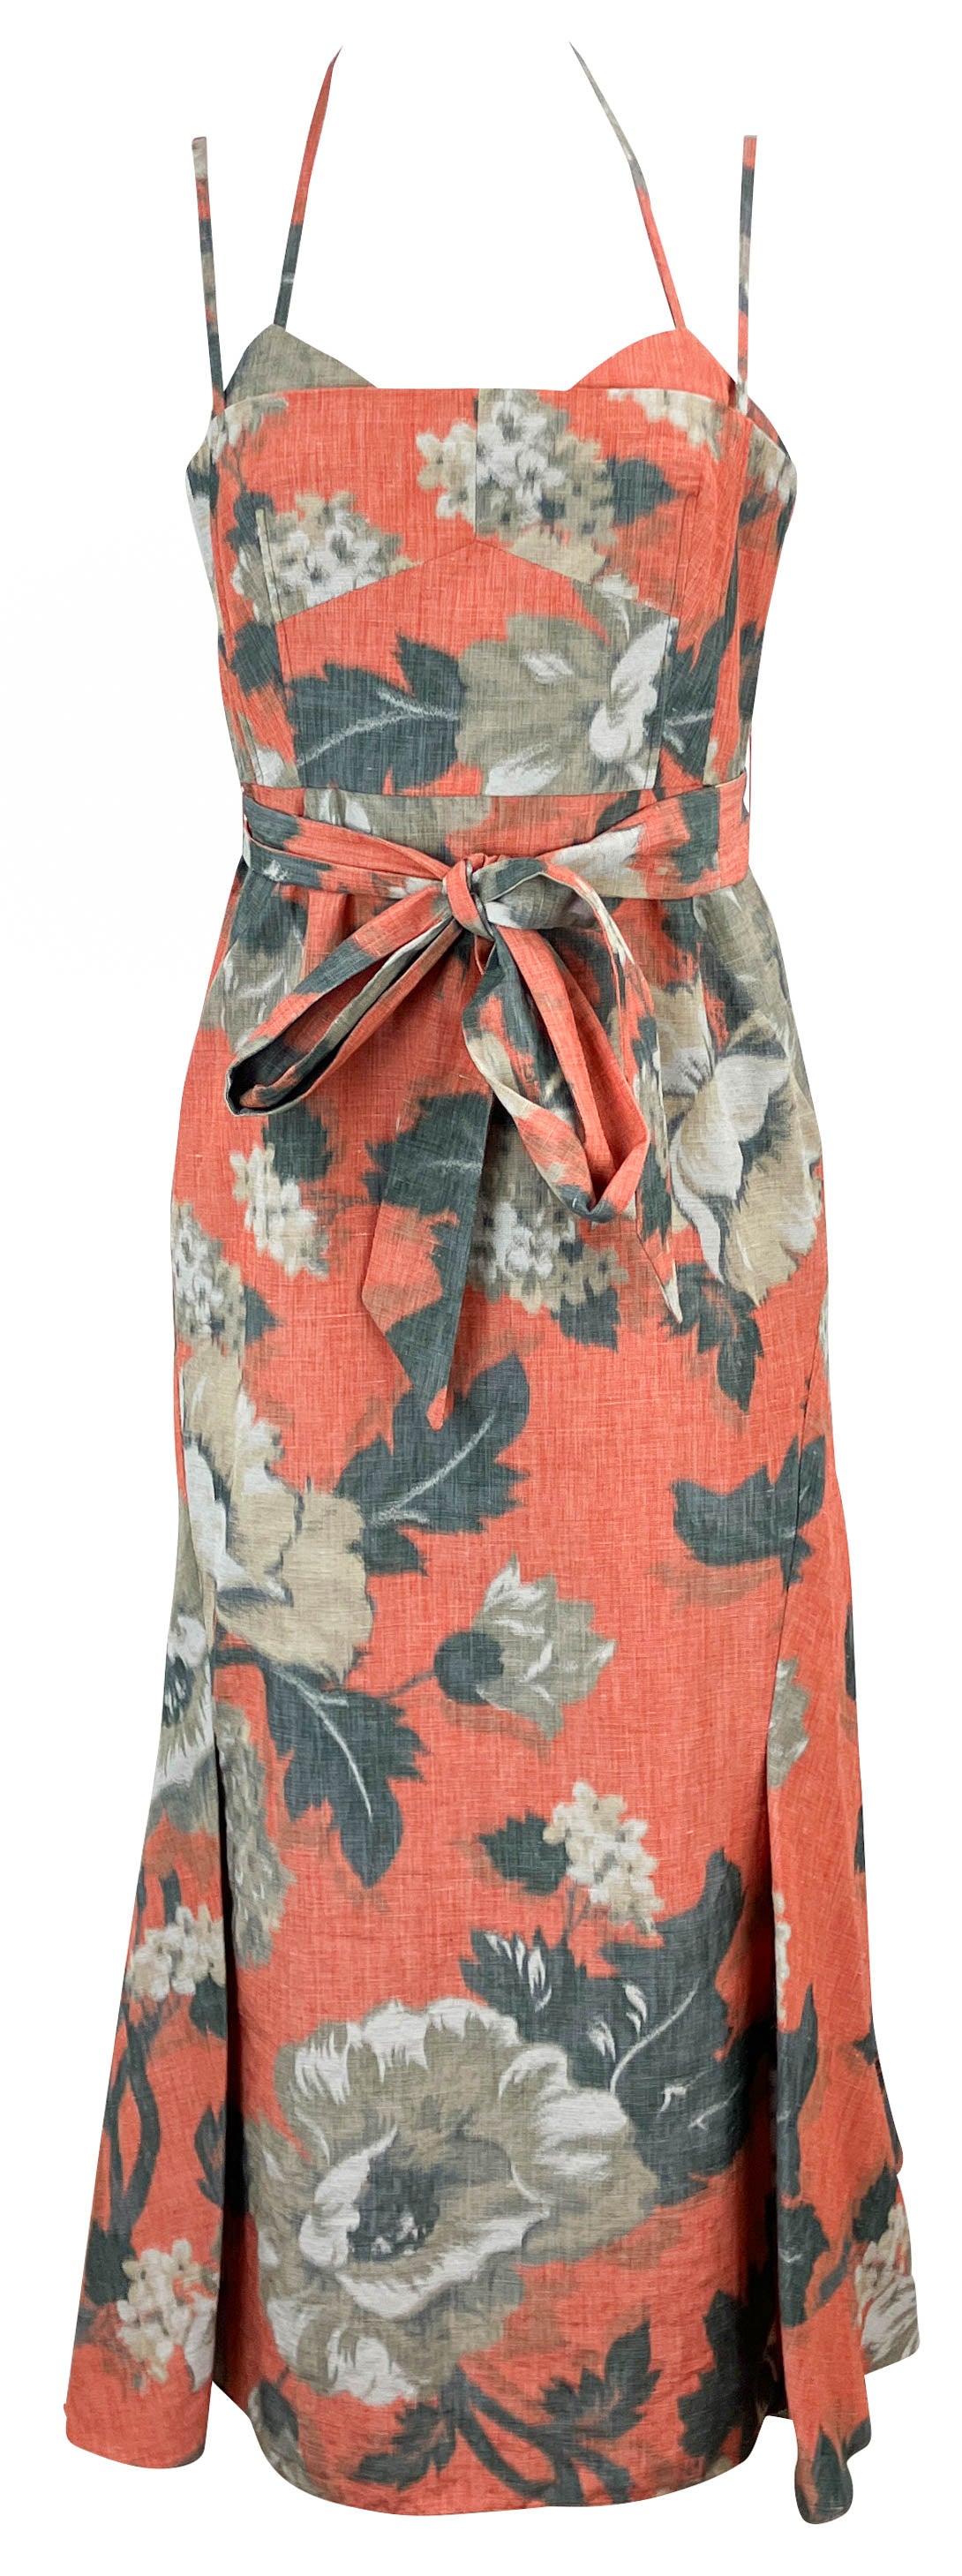 Erdem Otto Strappy Linen Chine Dress - Discounts on Erdem at UAL